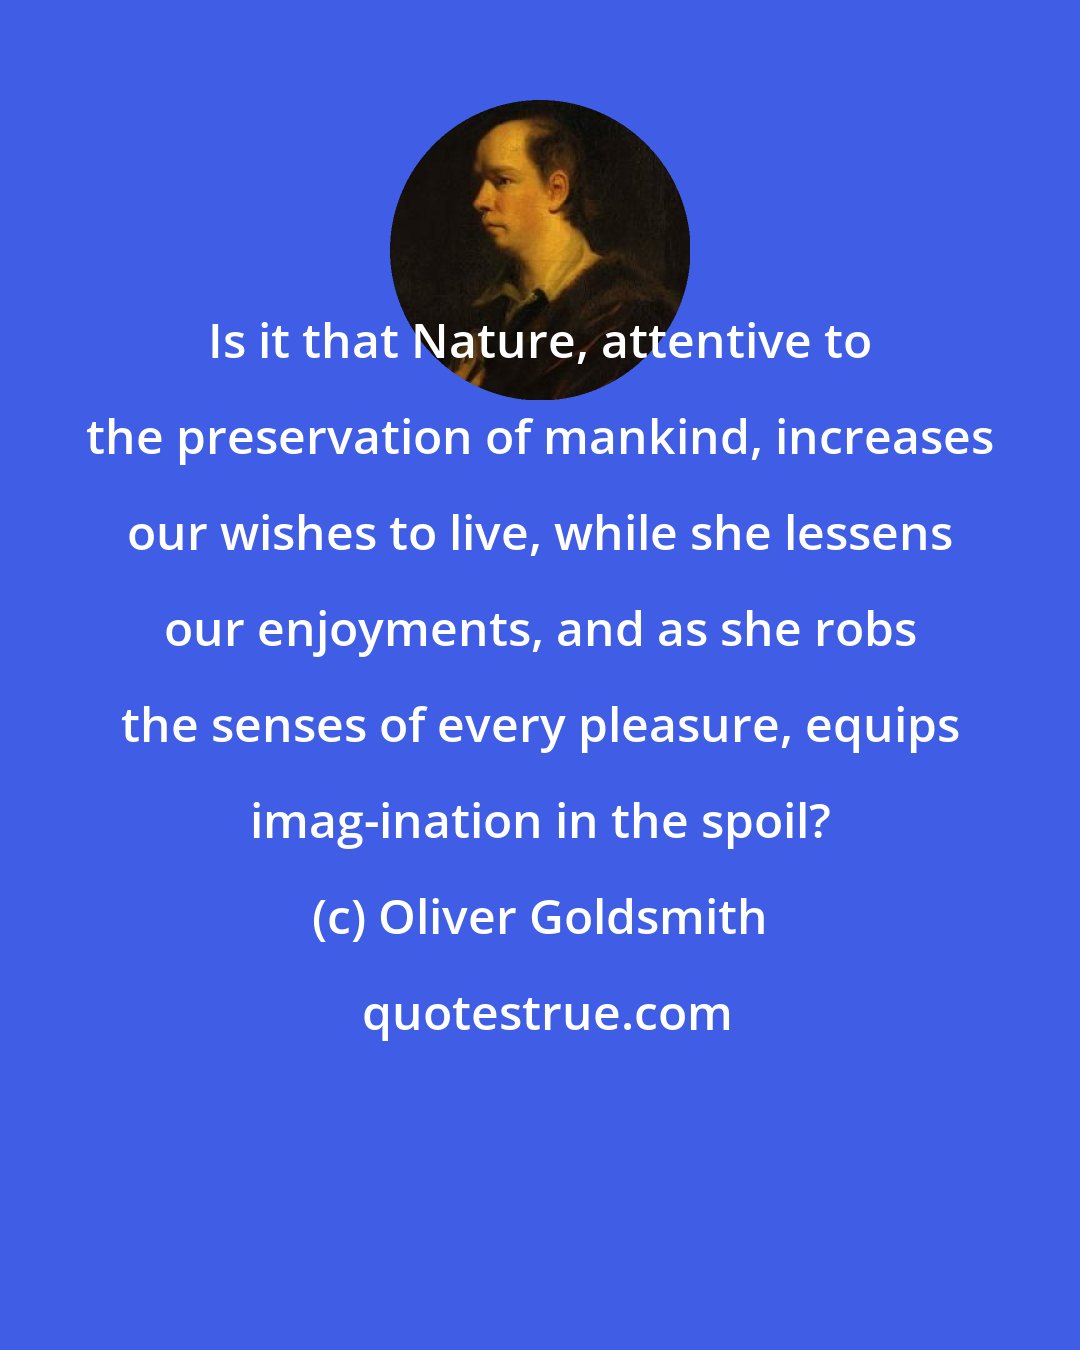 Oliver Goldsmith: Is it that Nature, attentive to the preservation of mankind, increases our wishes to live, while she lessens our enjoyments, and as she robs the senses of every pleasure, equips imag-ination in the spoil?